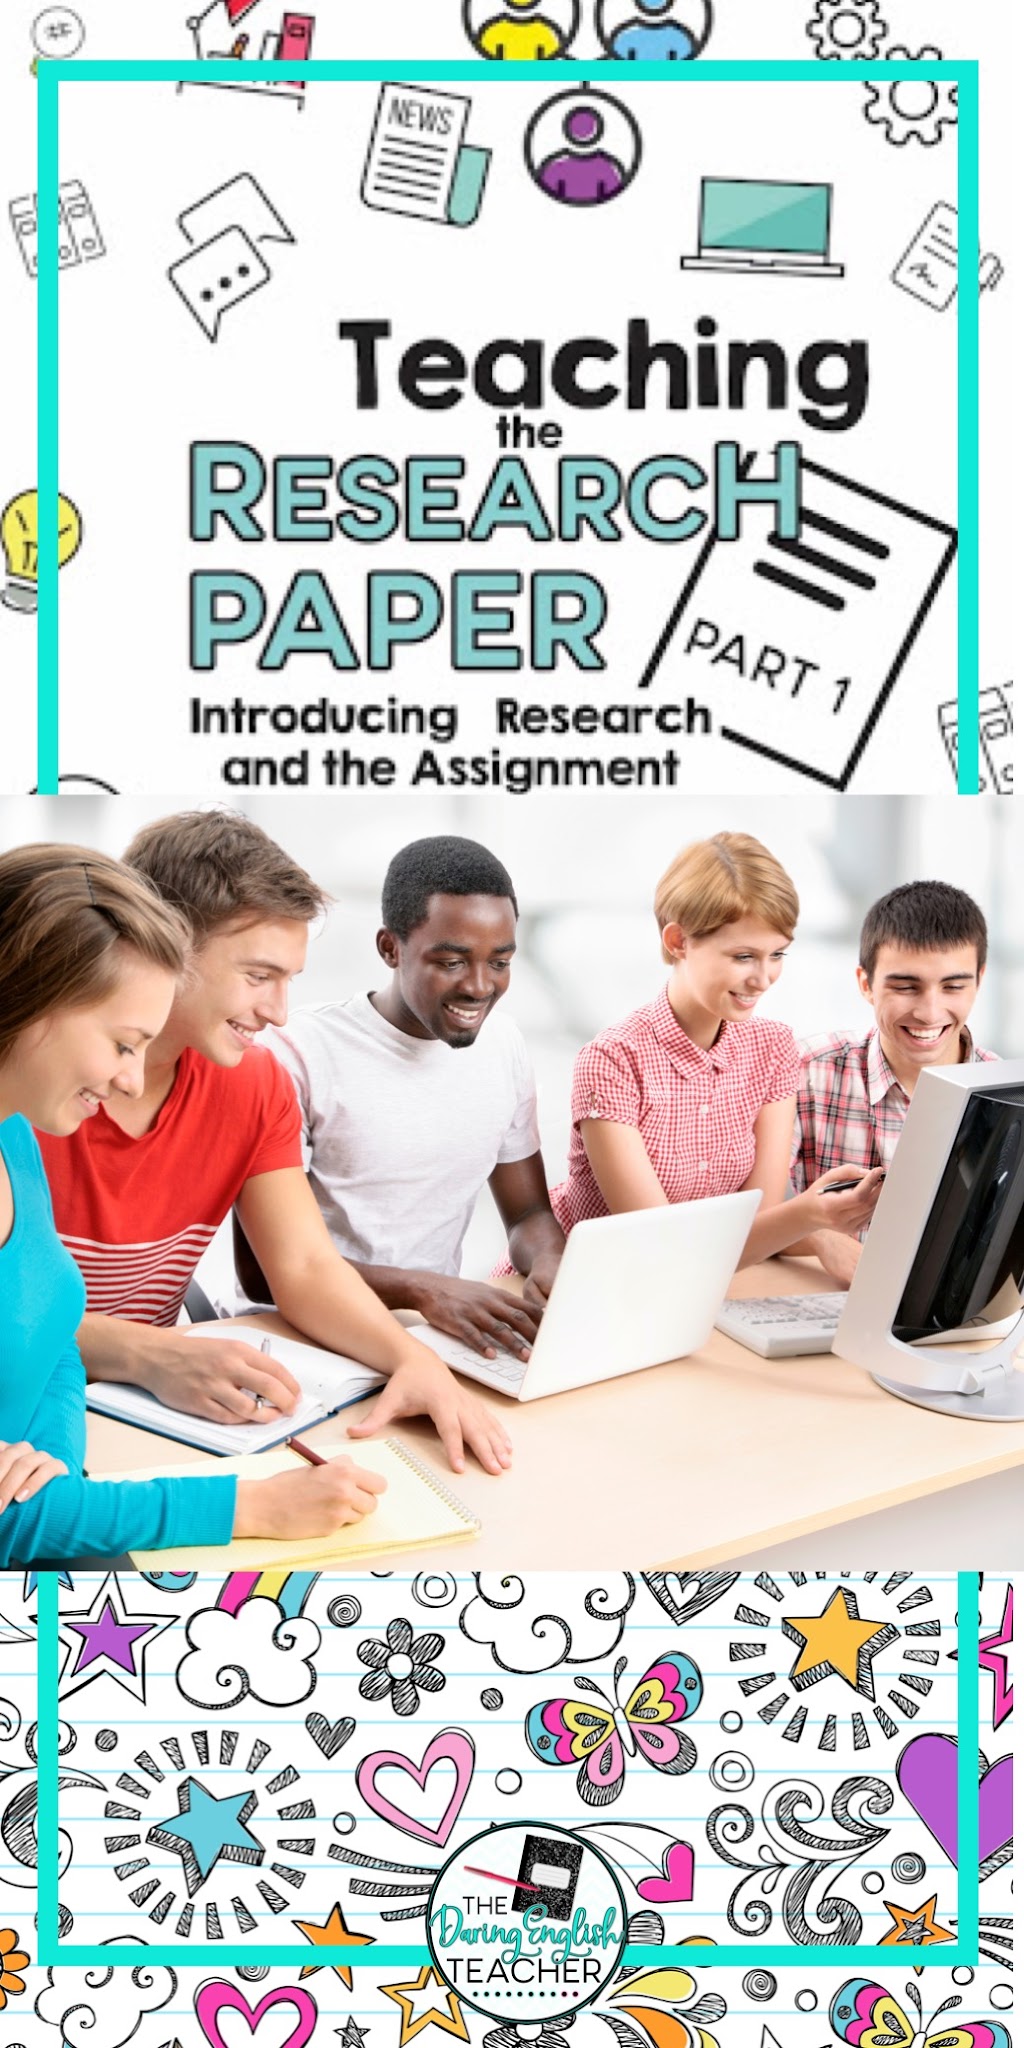 Teaching the Research Paper Part 1: Introducing the Research Paper and Preparing Students for the Assignment